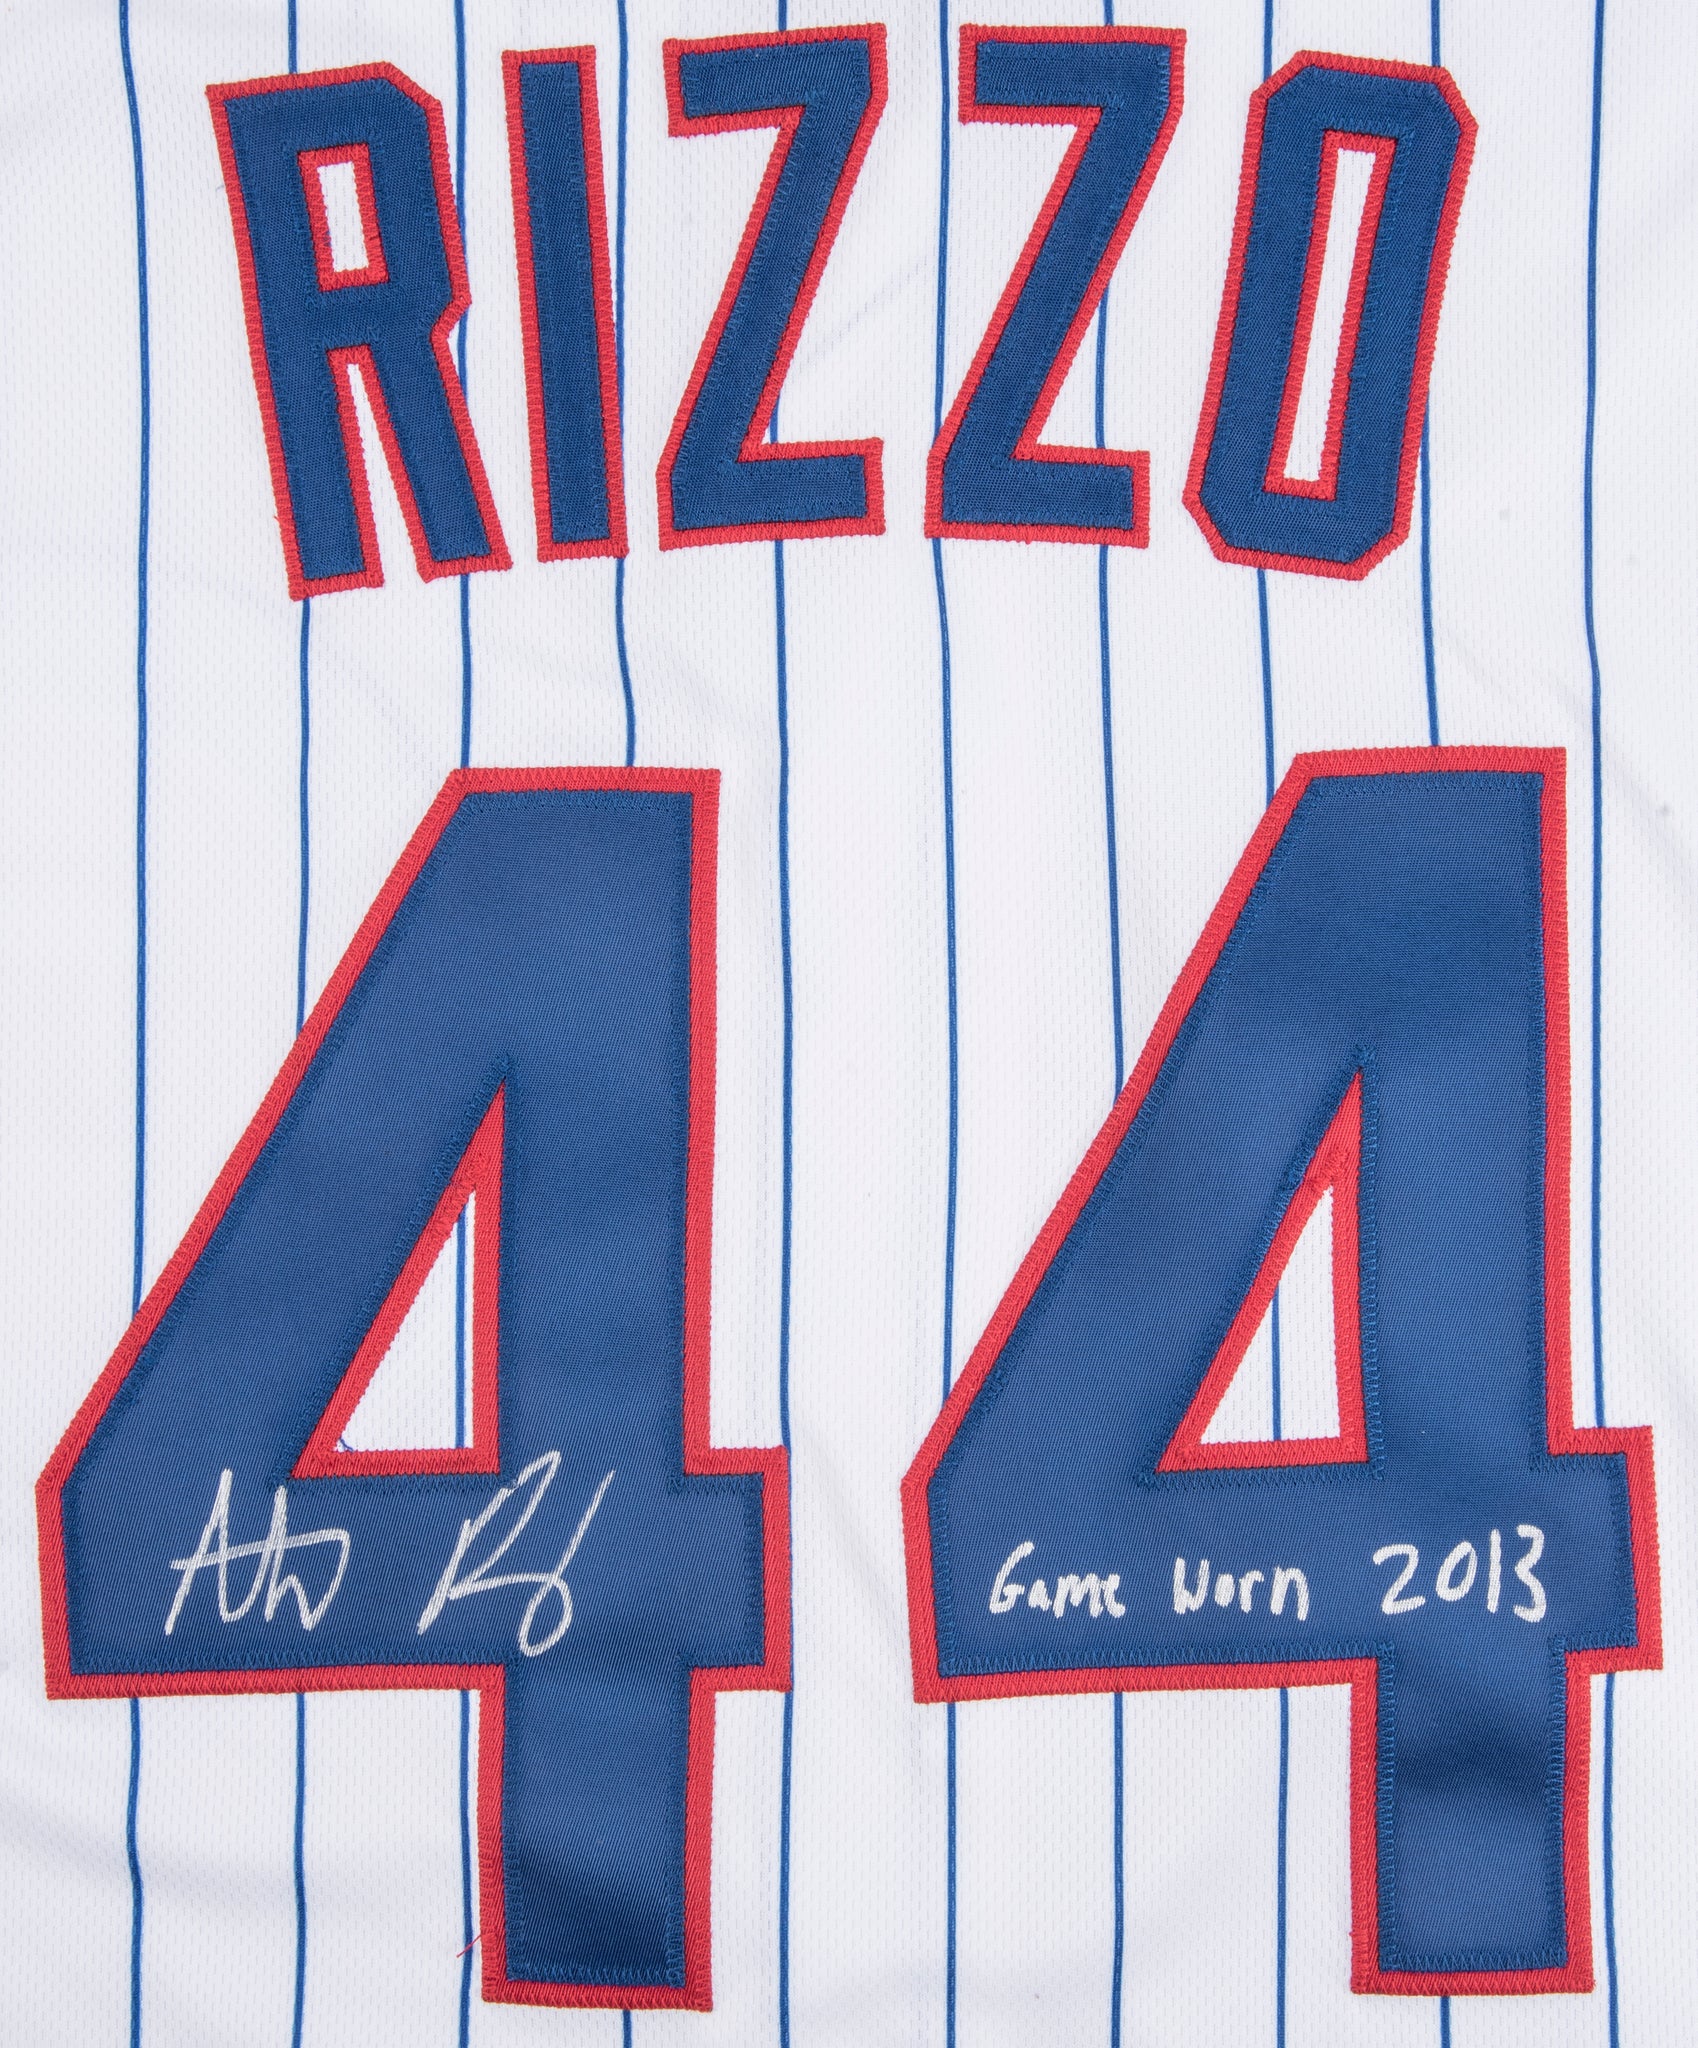 2016 Anthony Rizzo Game-Worn Chicago Cubs Jersey vs. Cardinals 9